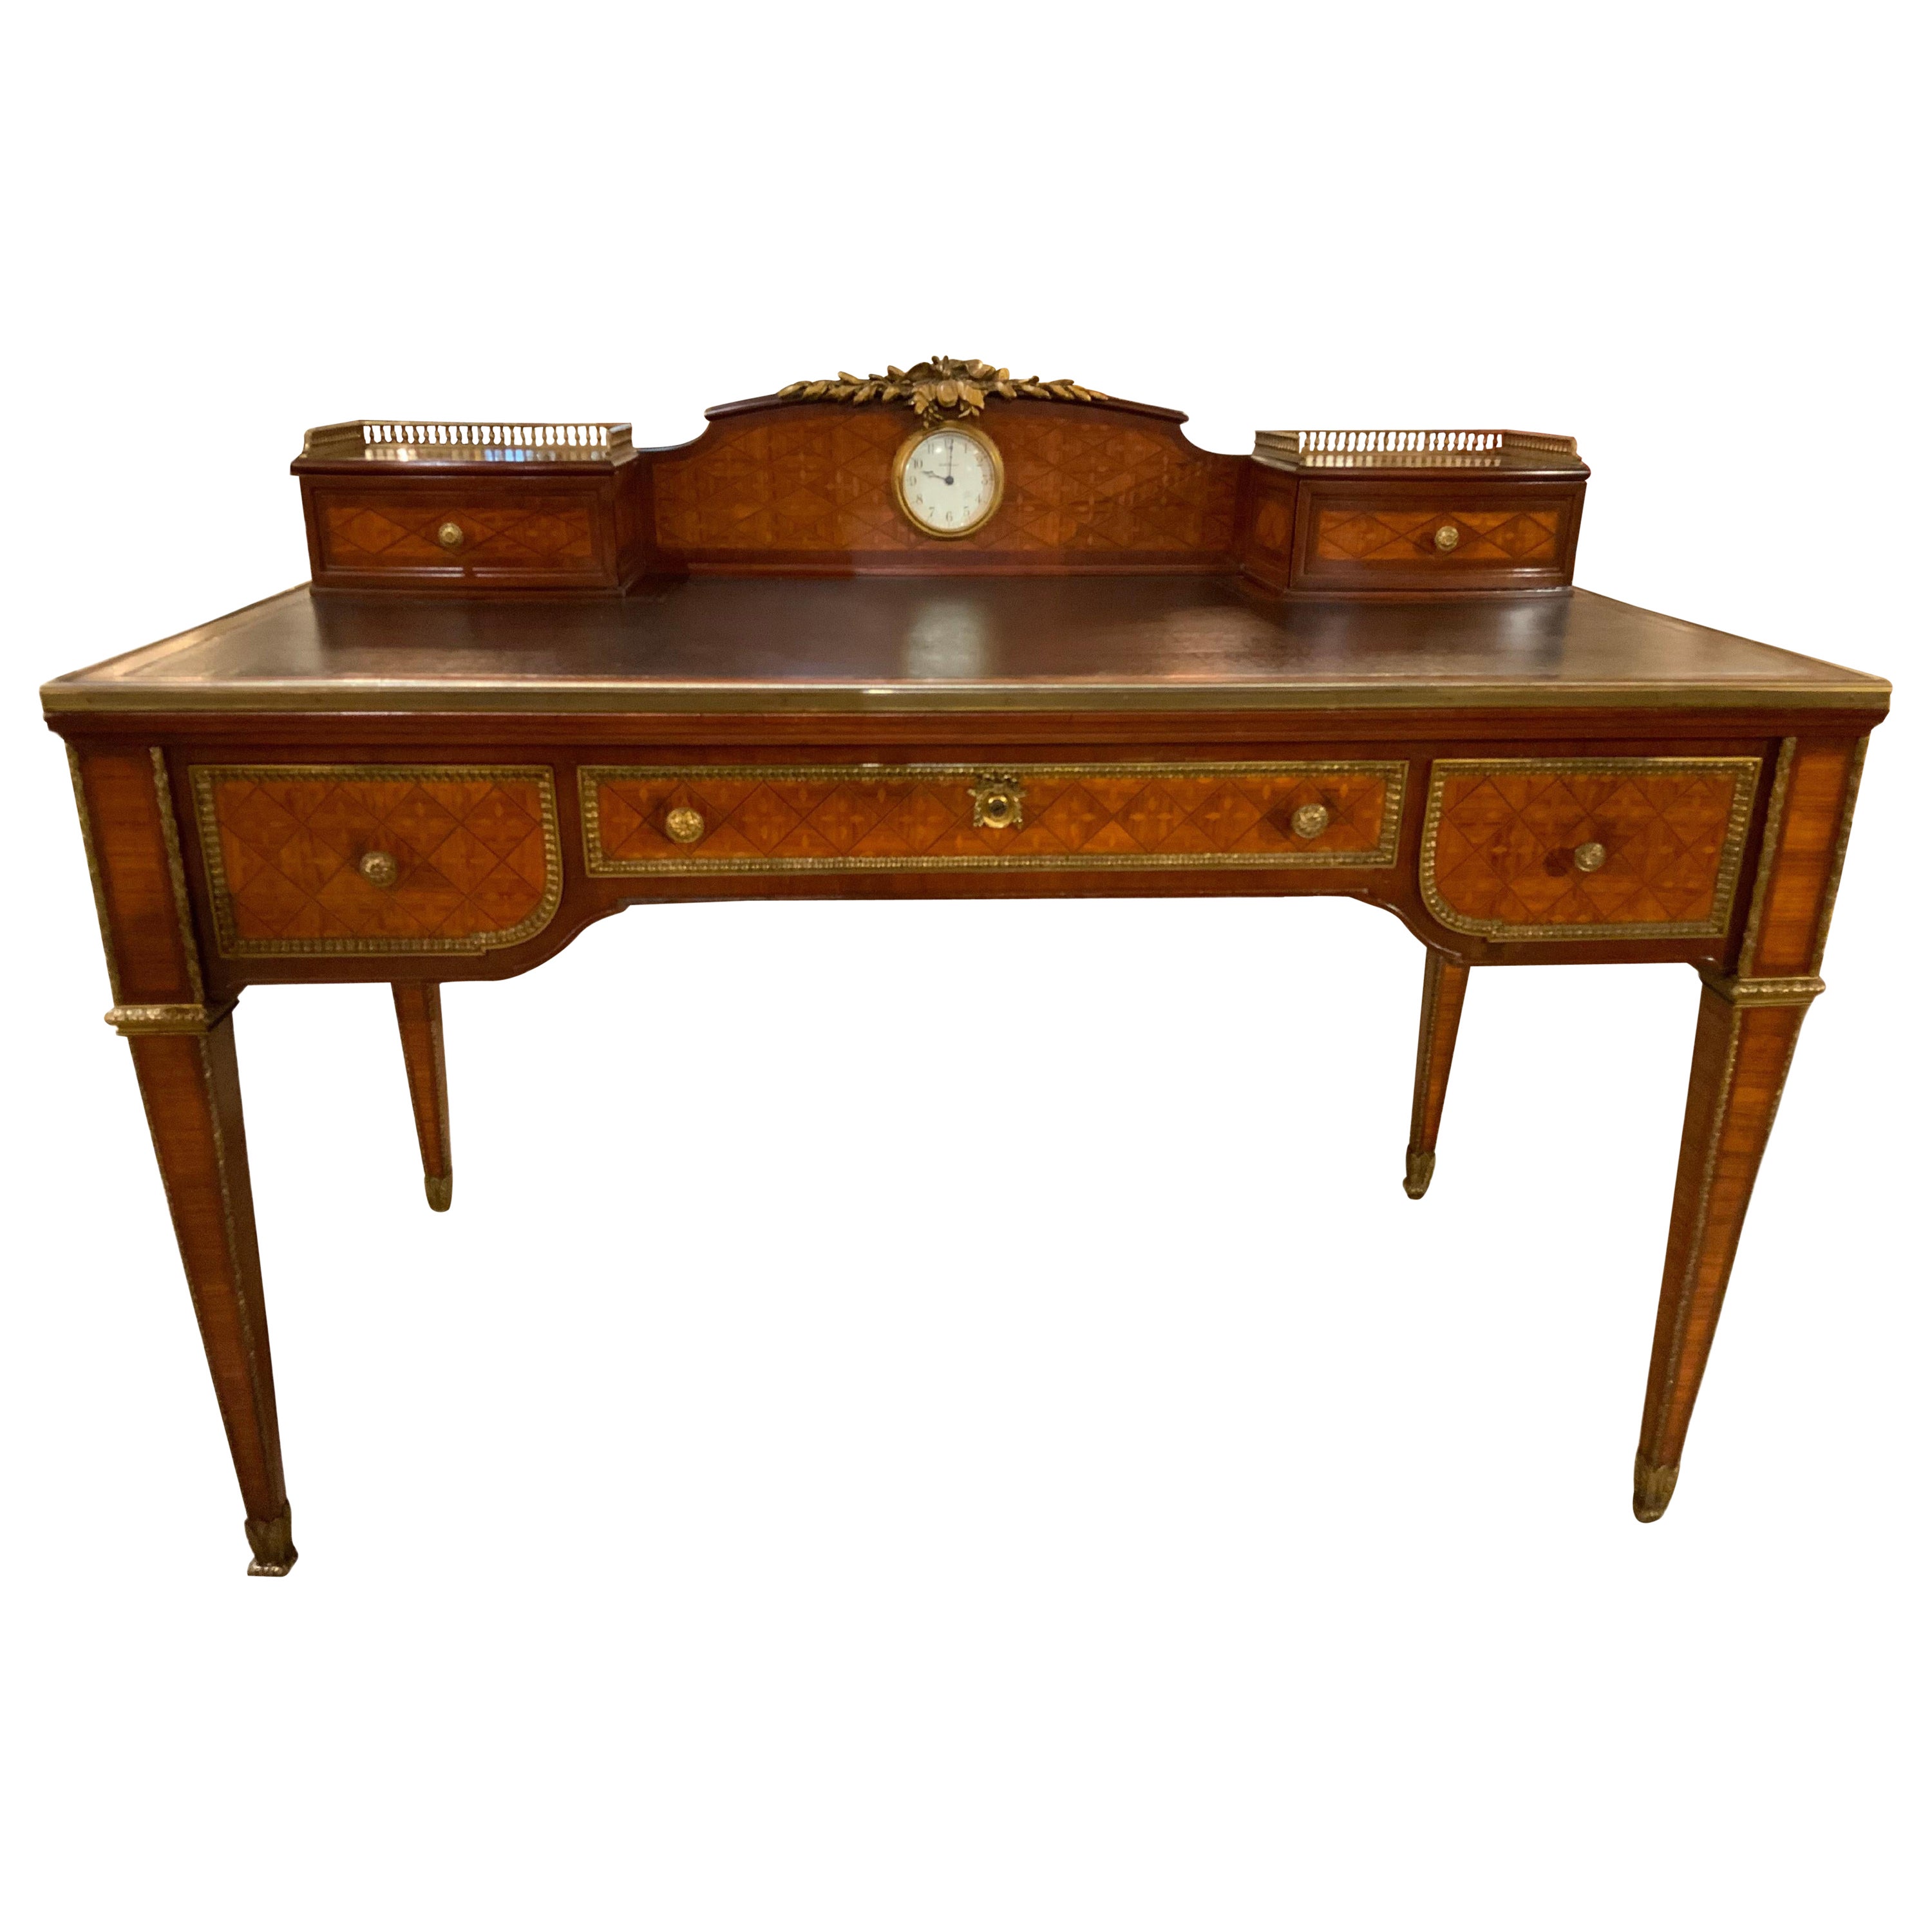 French Parquetry Inlaid Desk with Leather Top and Inset Clock